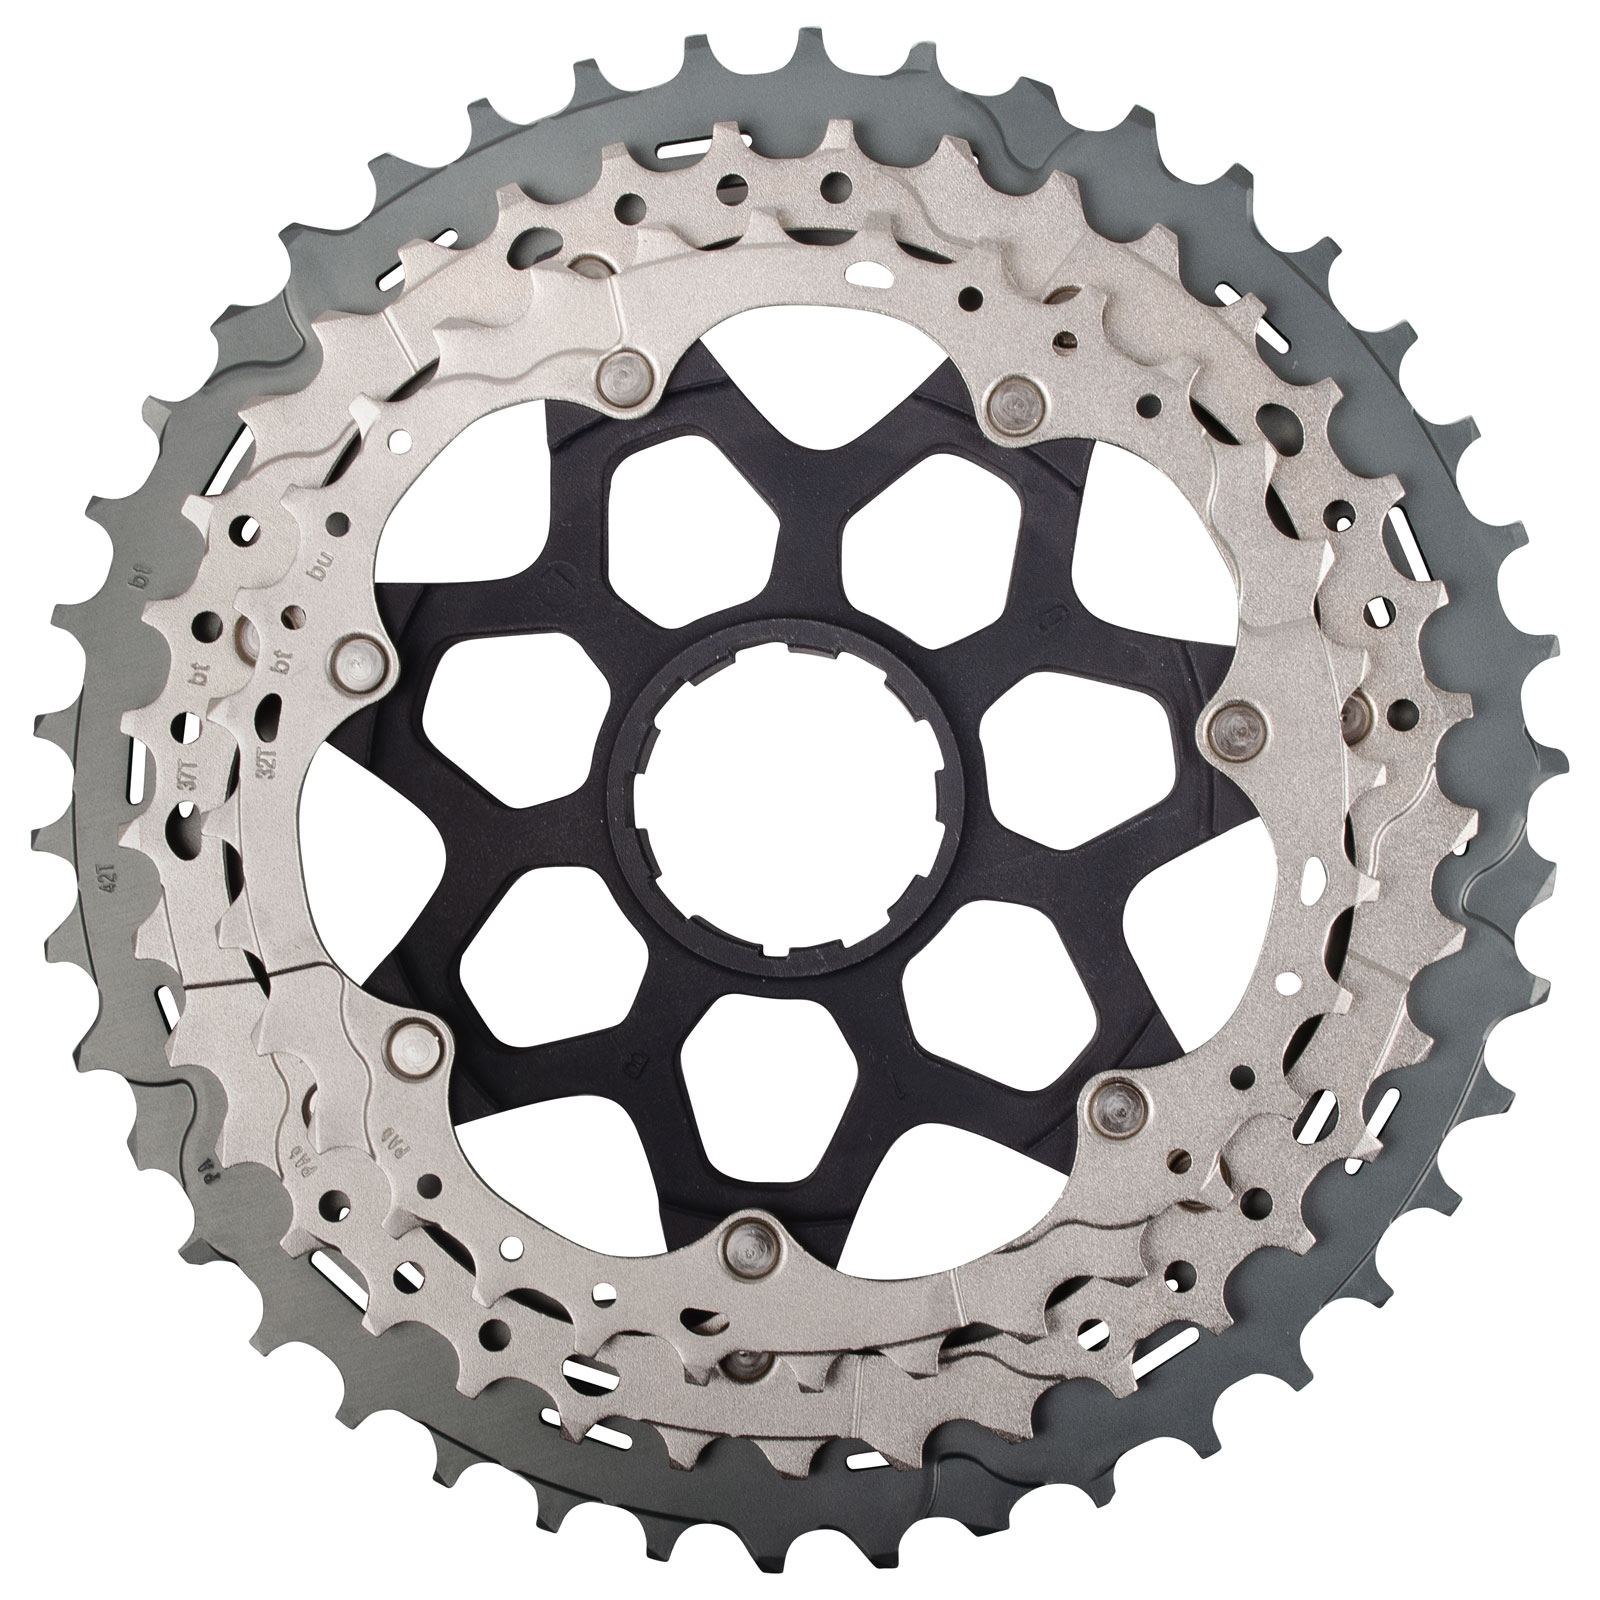 Picture of Shimano Sprocket for Deore XT / SLX 11-speed Cassette - 32/37/42 teeth for 11-42 (Y1RK98050) - CS-M8000